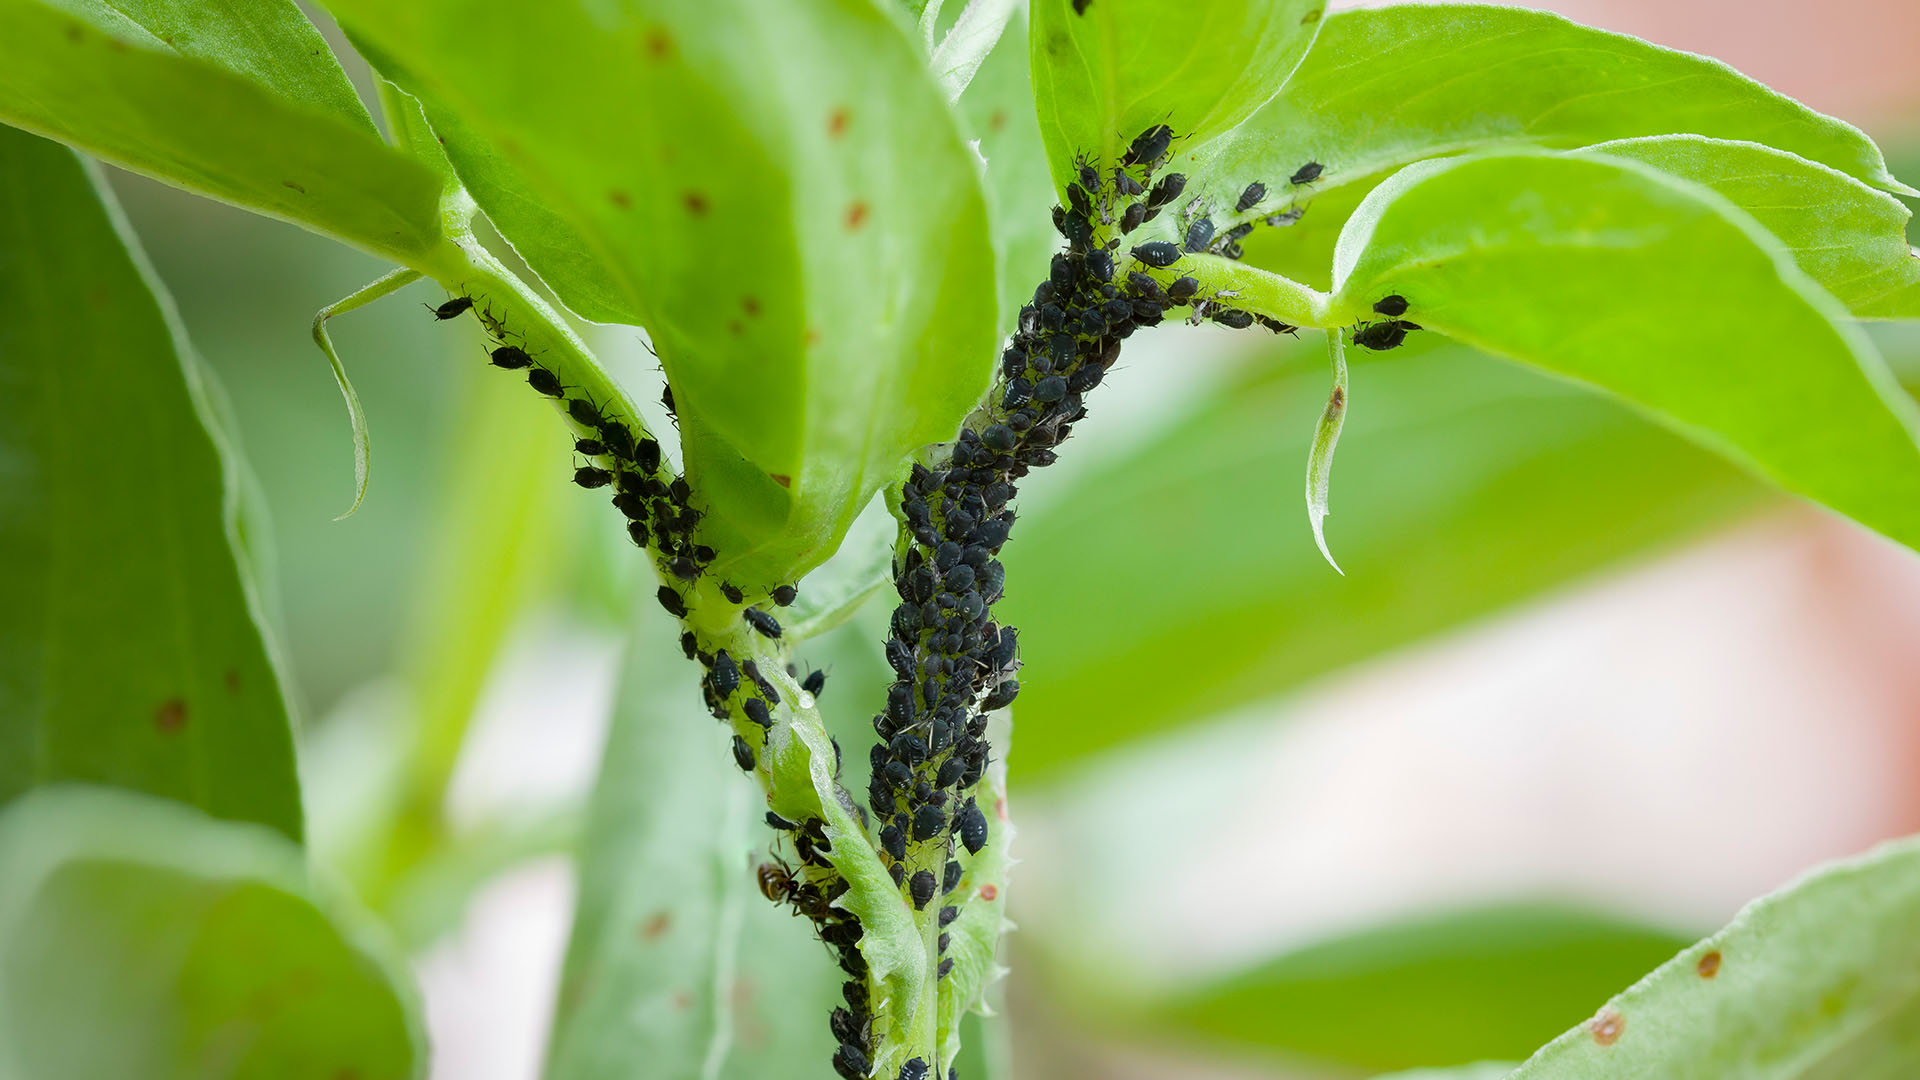 Photo of pests. Insects swarm a house plant.